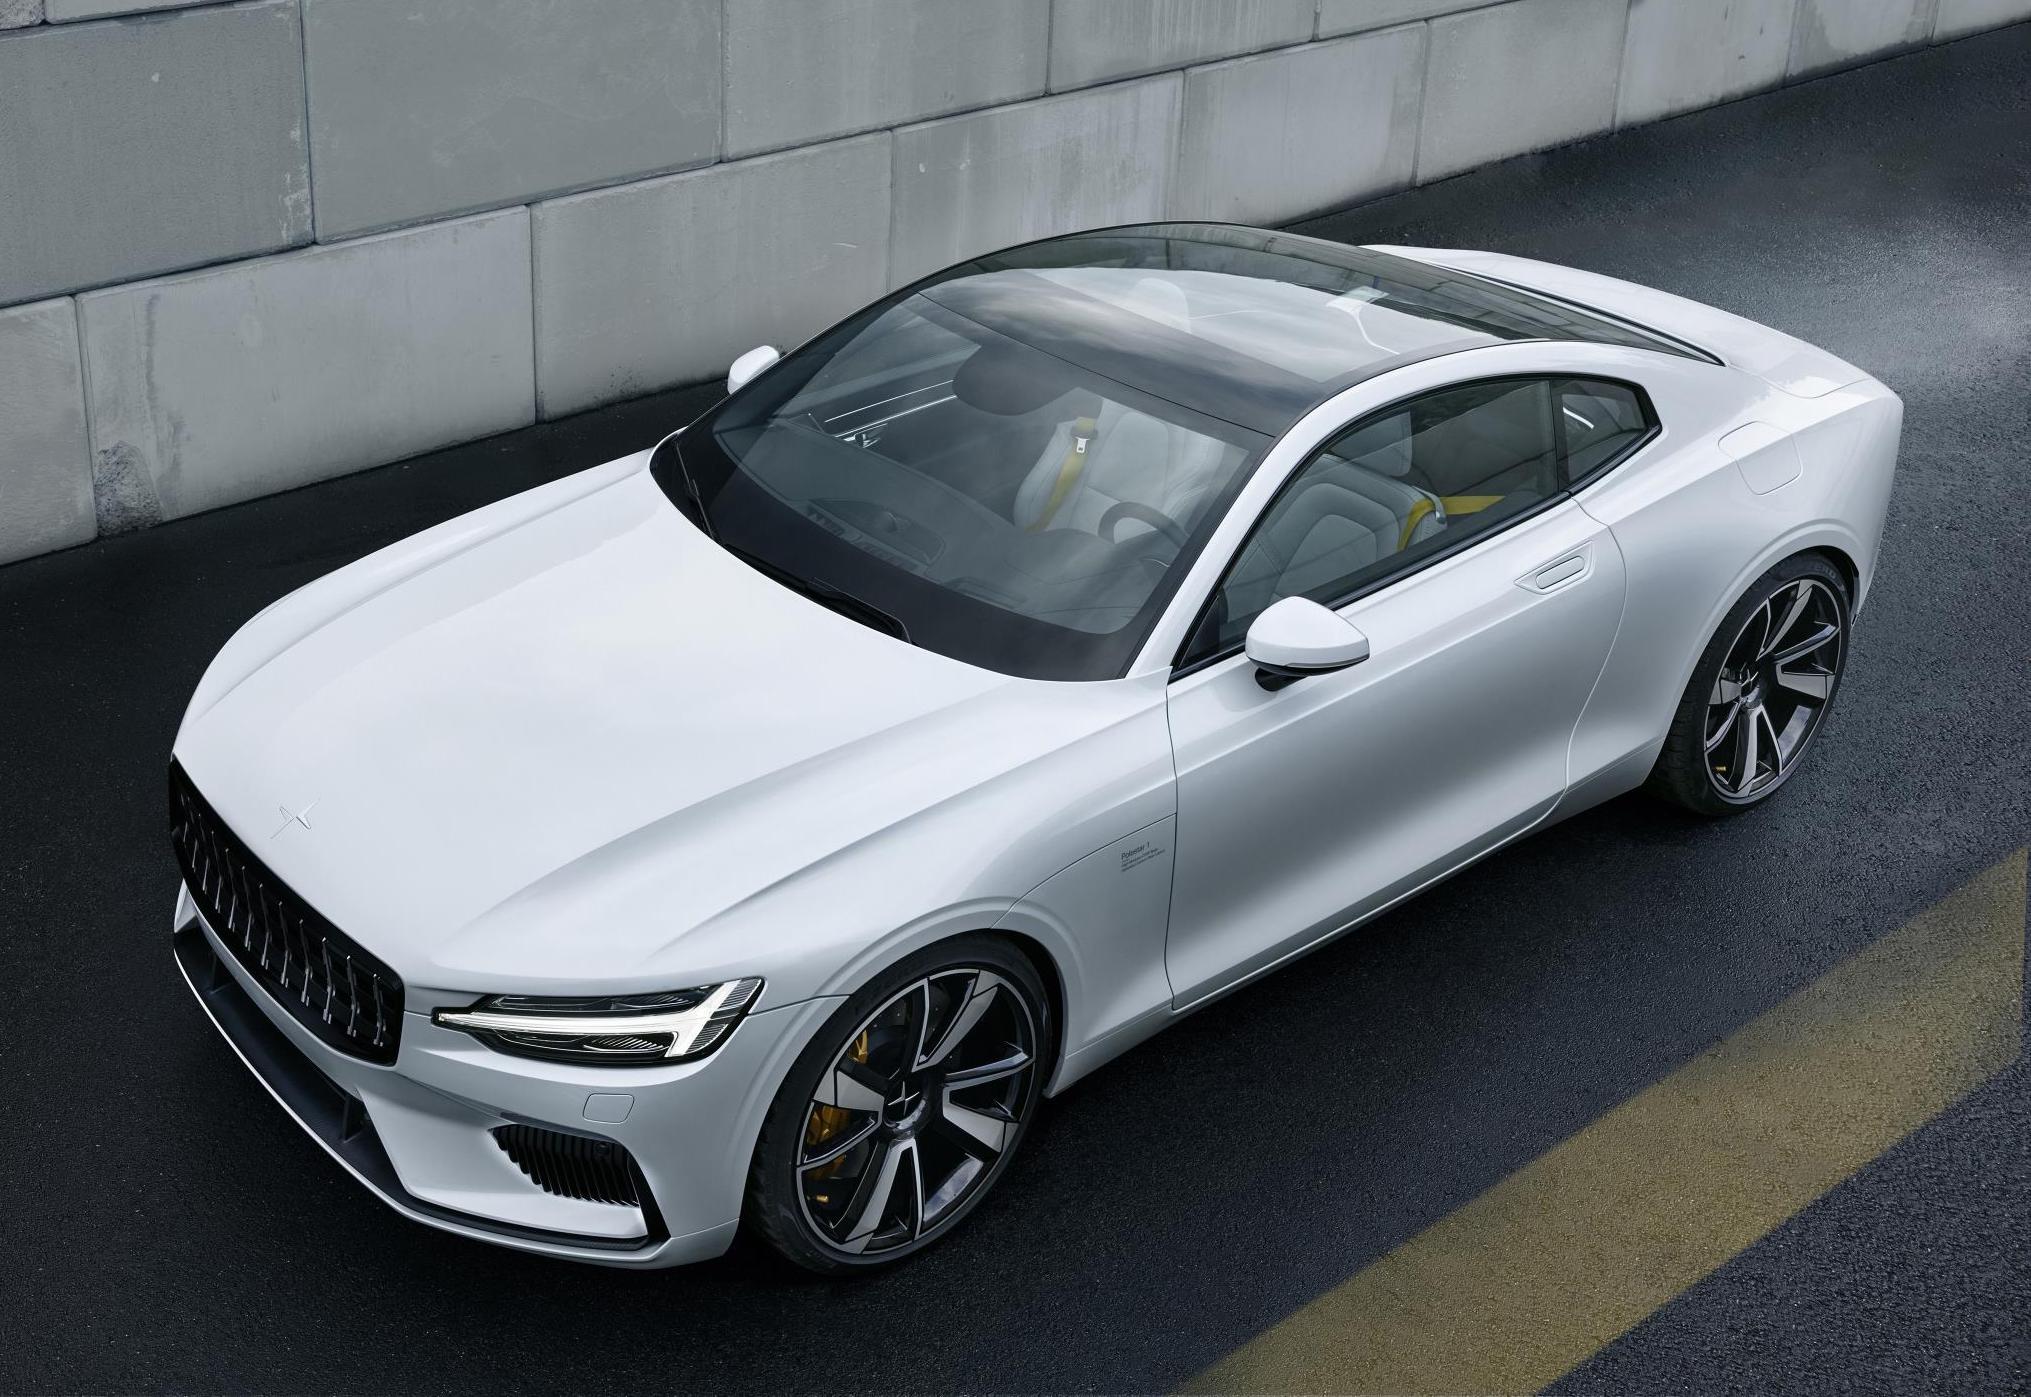 Pre-orders for Polestar 1 now open in 18 countries